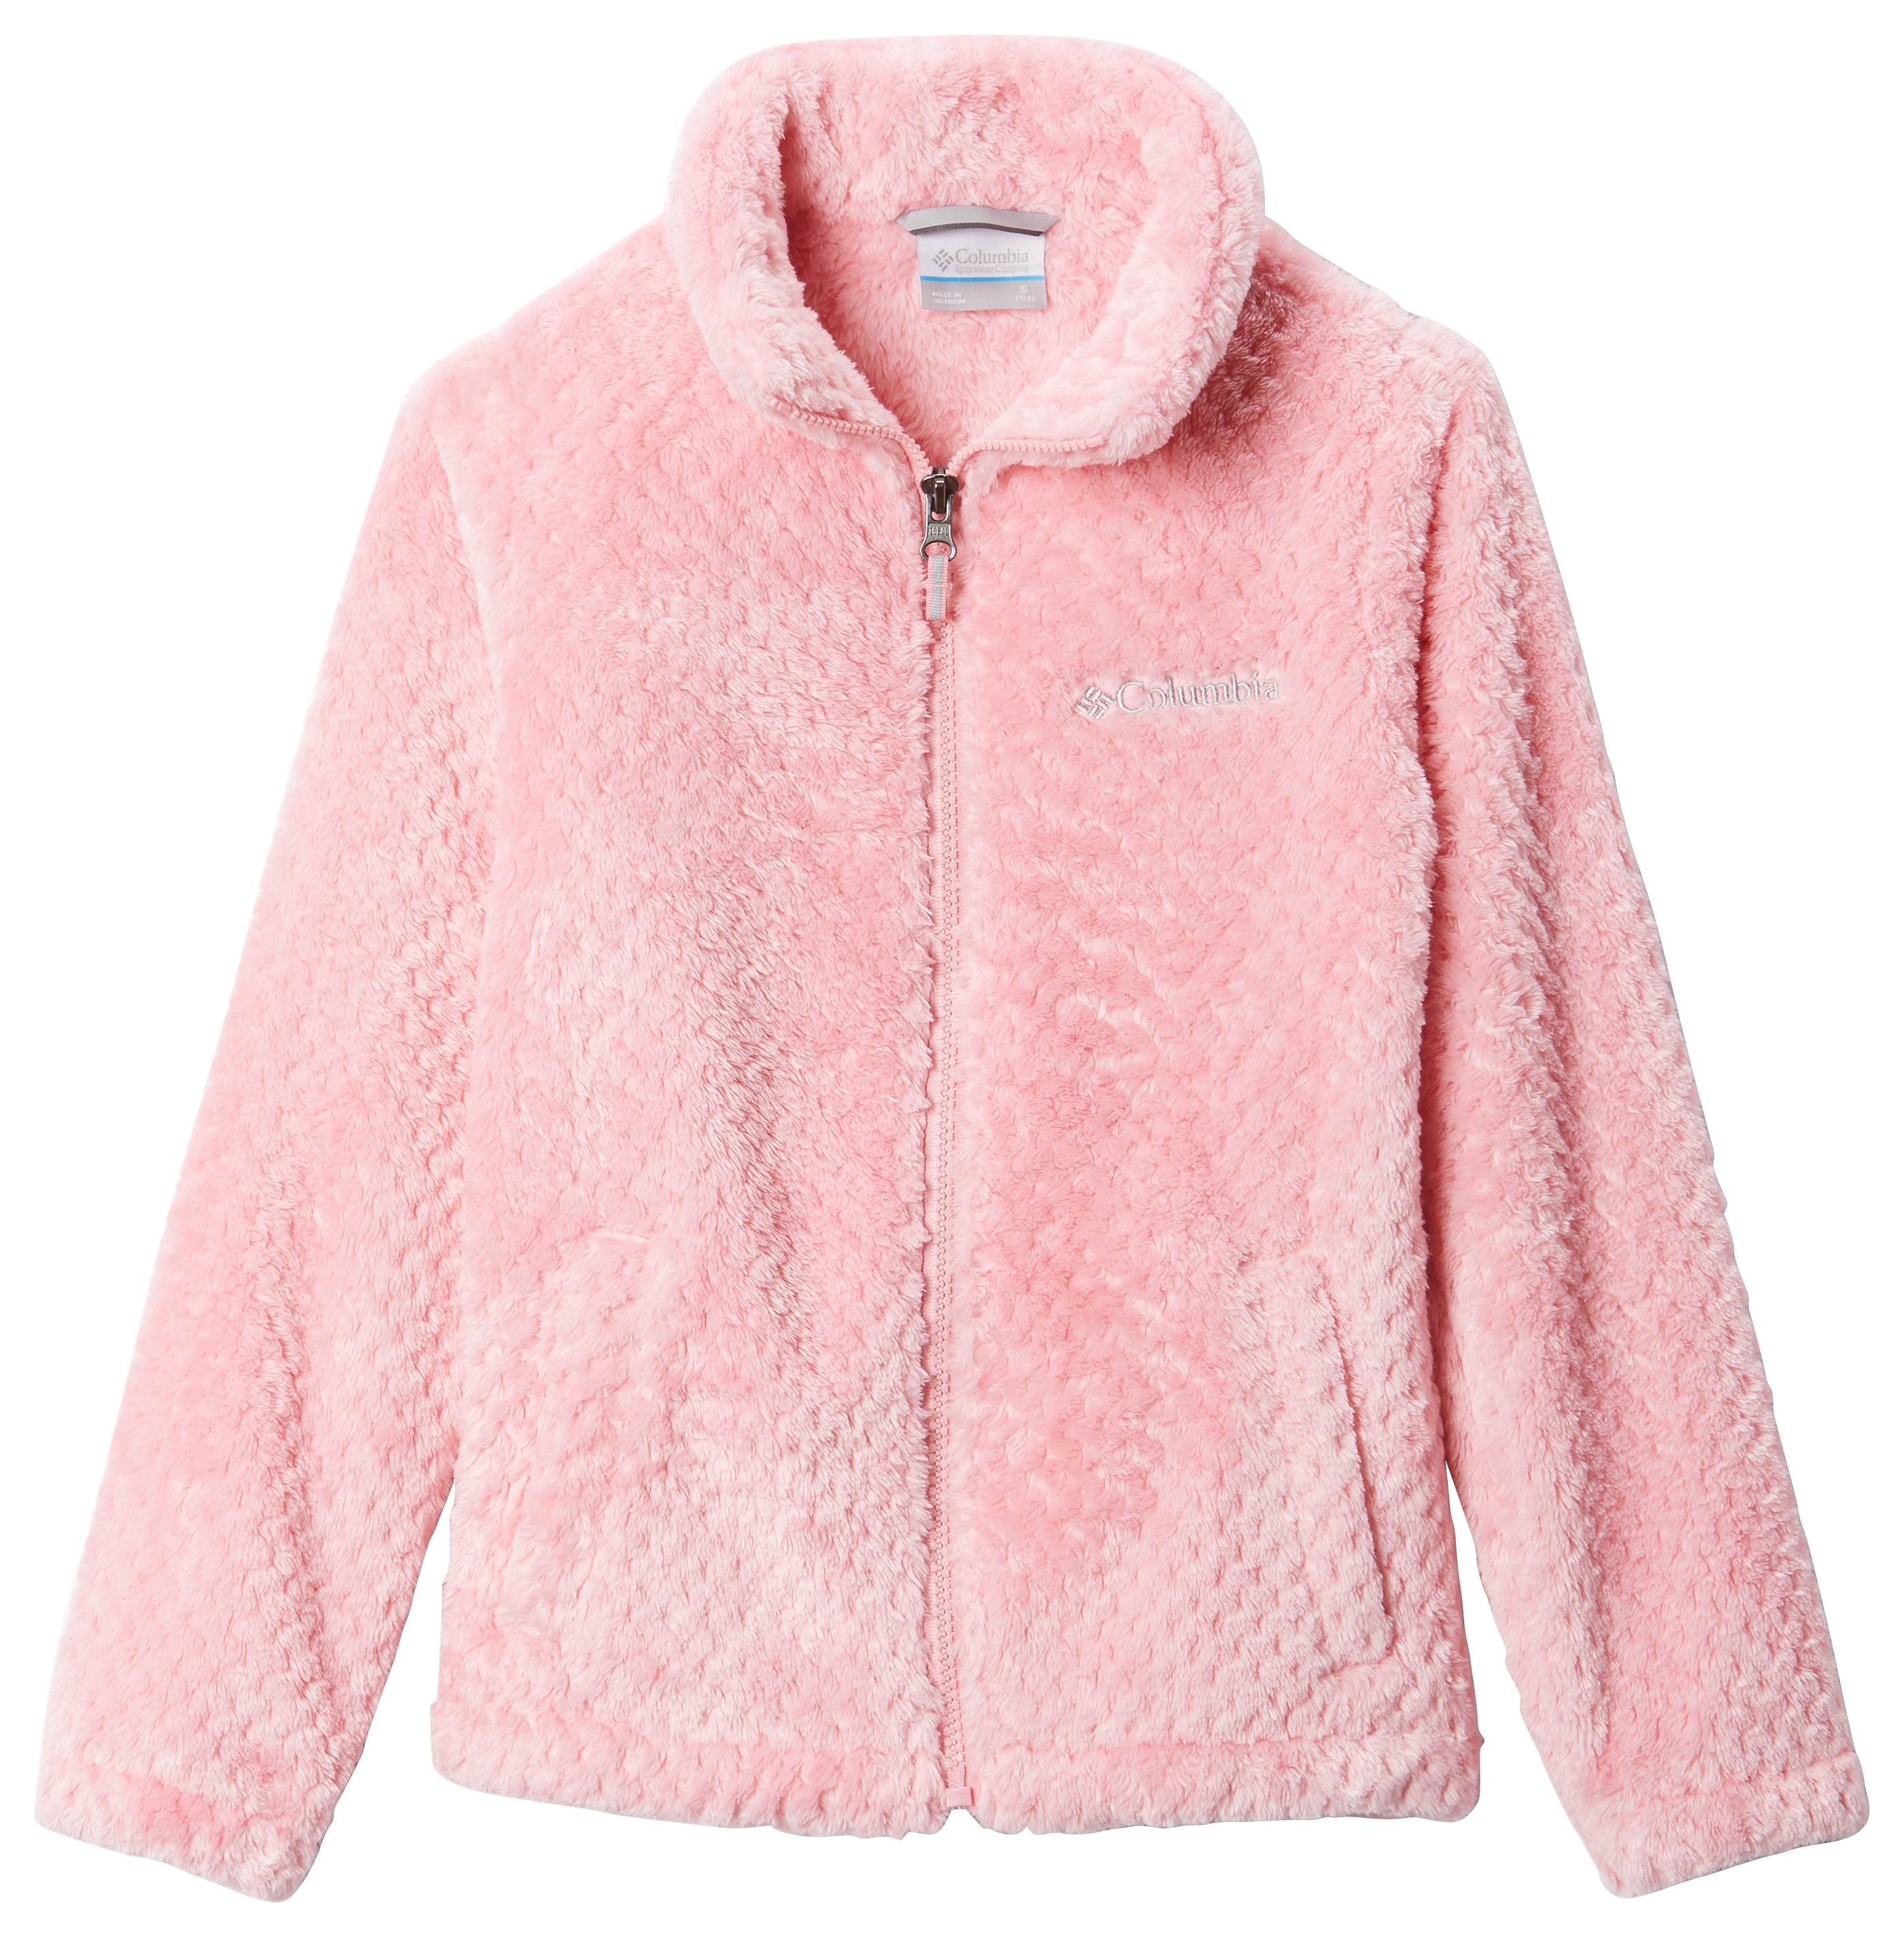 Columbia Fire Side | or for Toddlers Shops Kids Full-Zip Pro Bass Sherpa Jacket